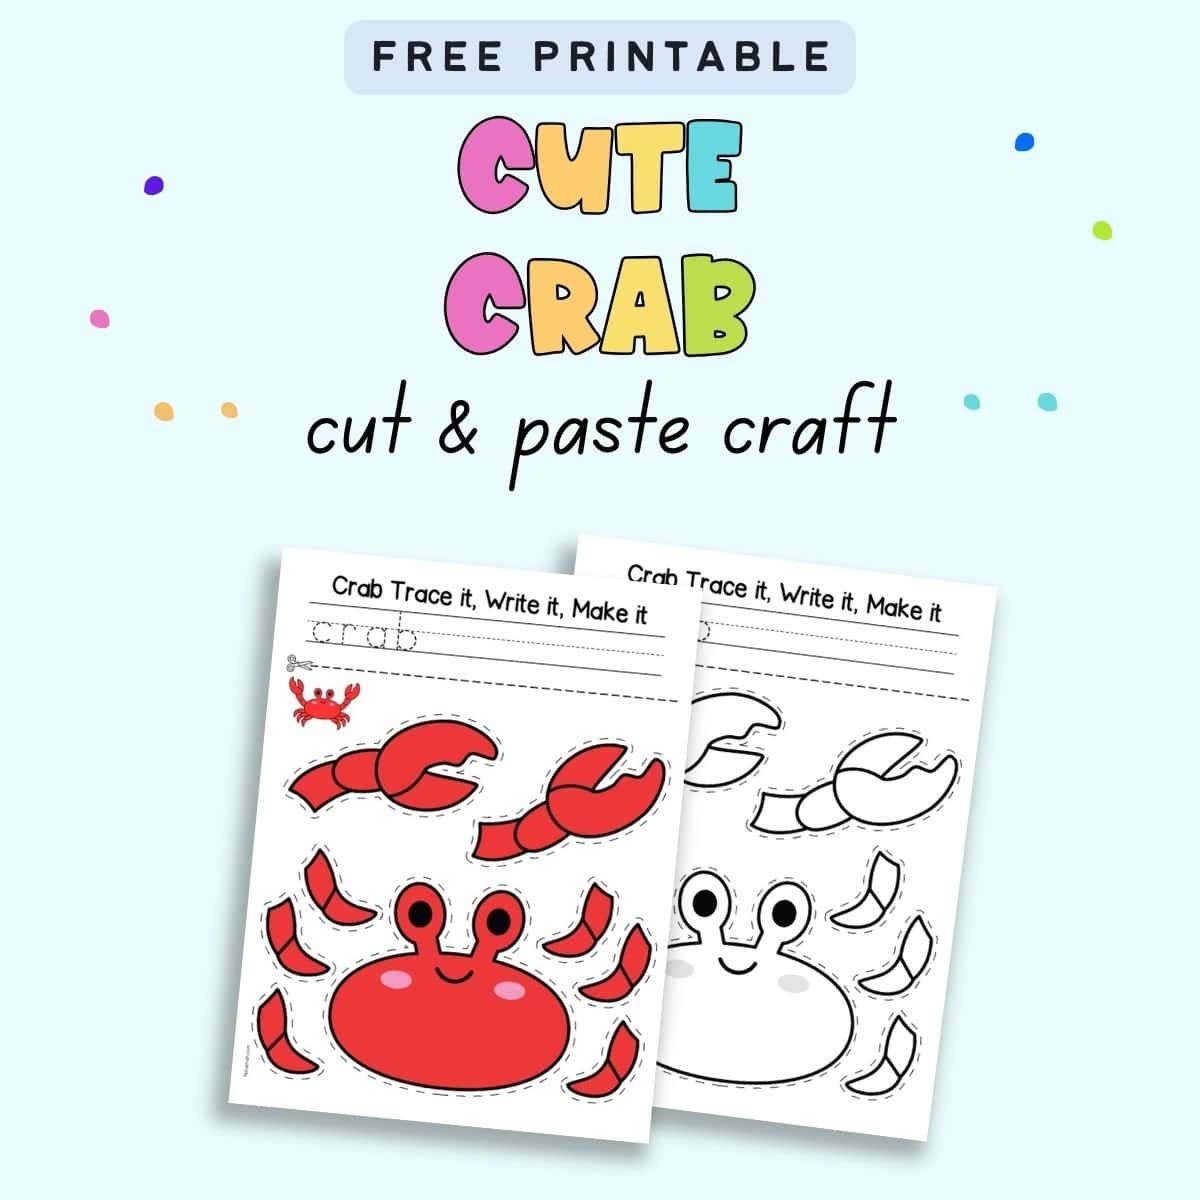 Text "Free printable cute crab cut and paste craft" with a preview of two printable pages of crab craft.